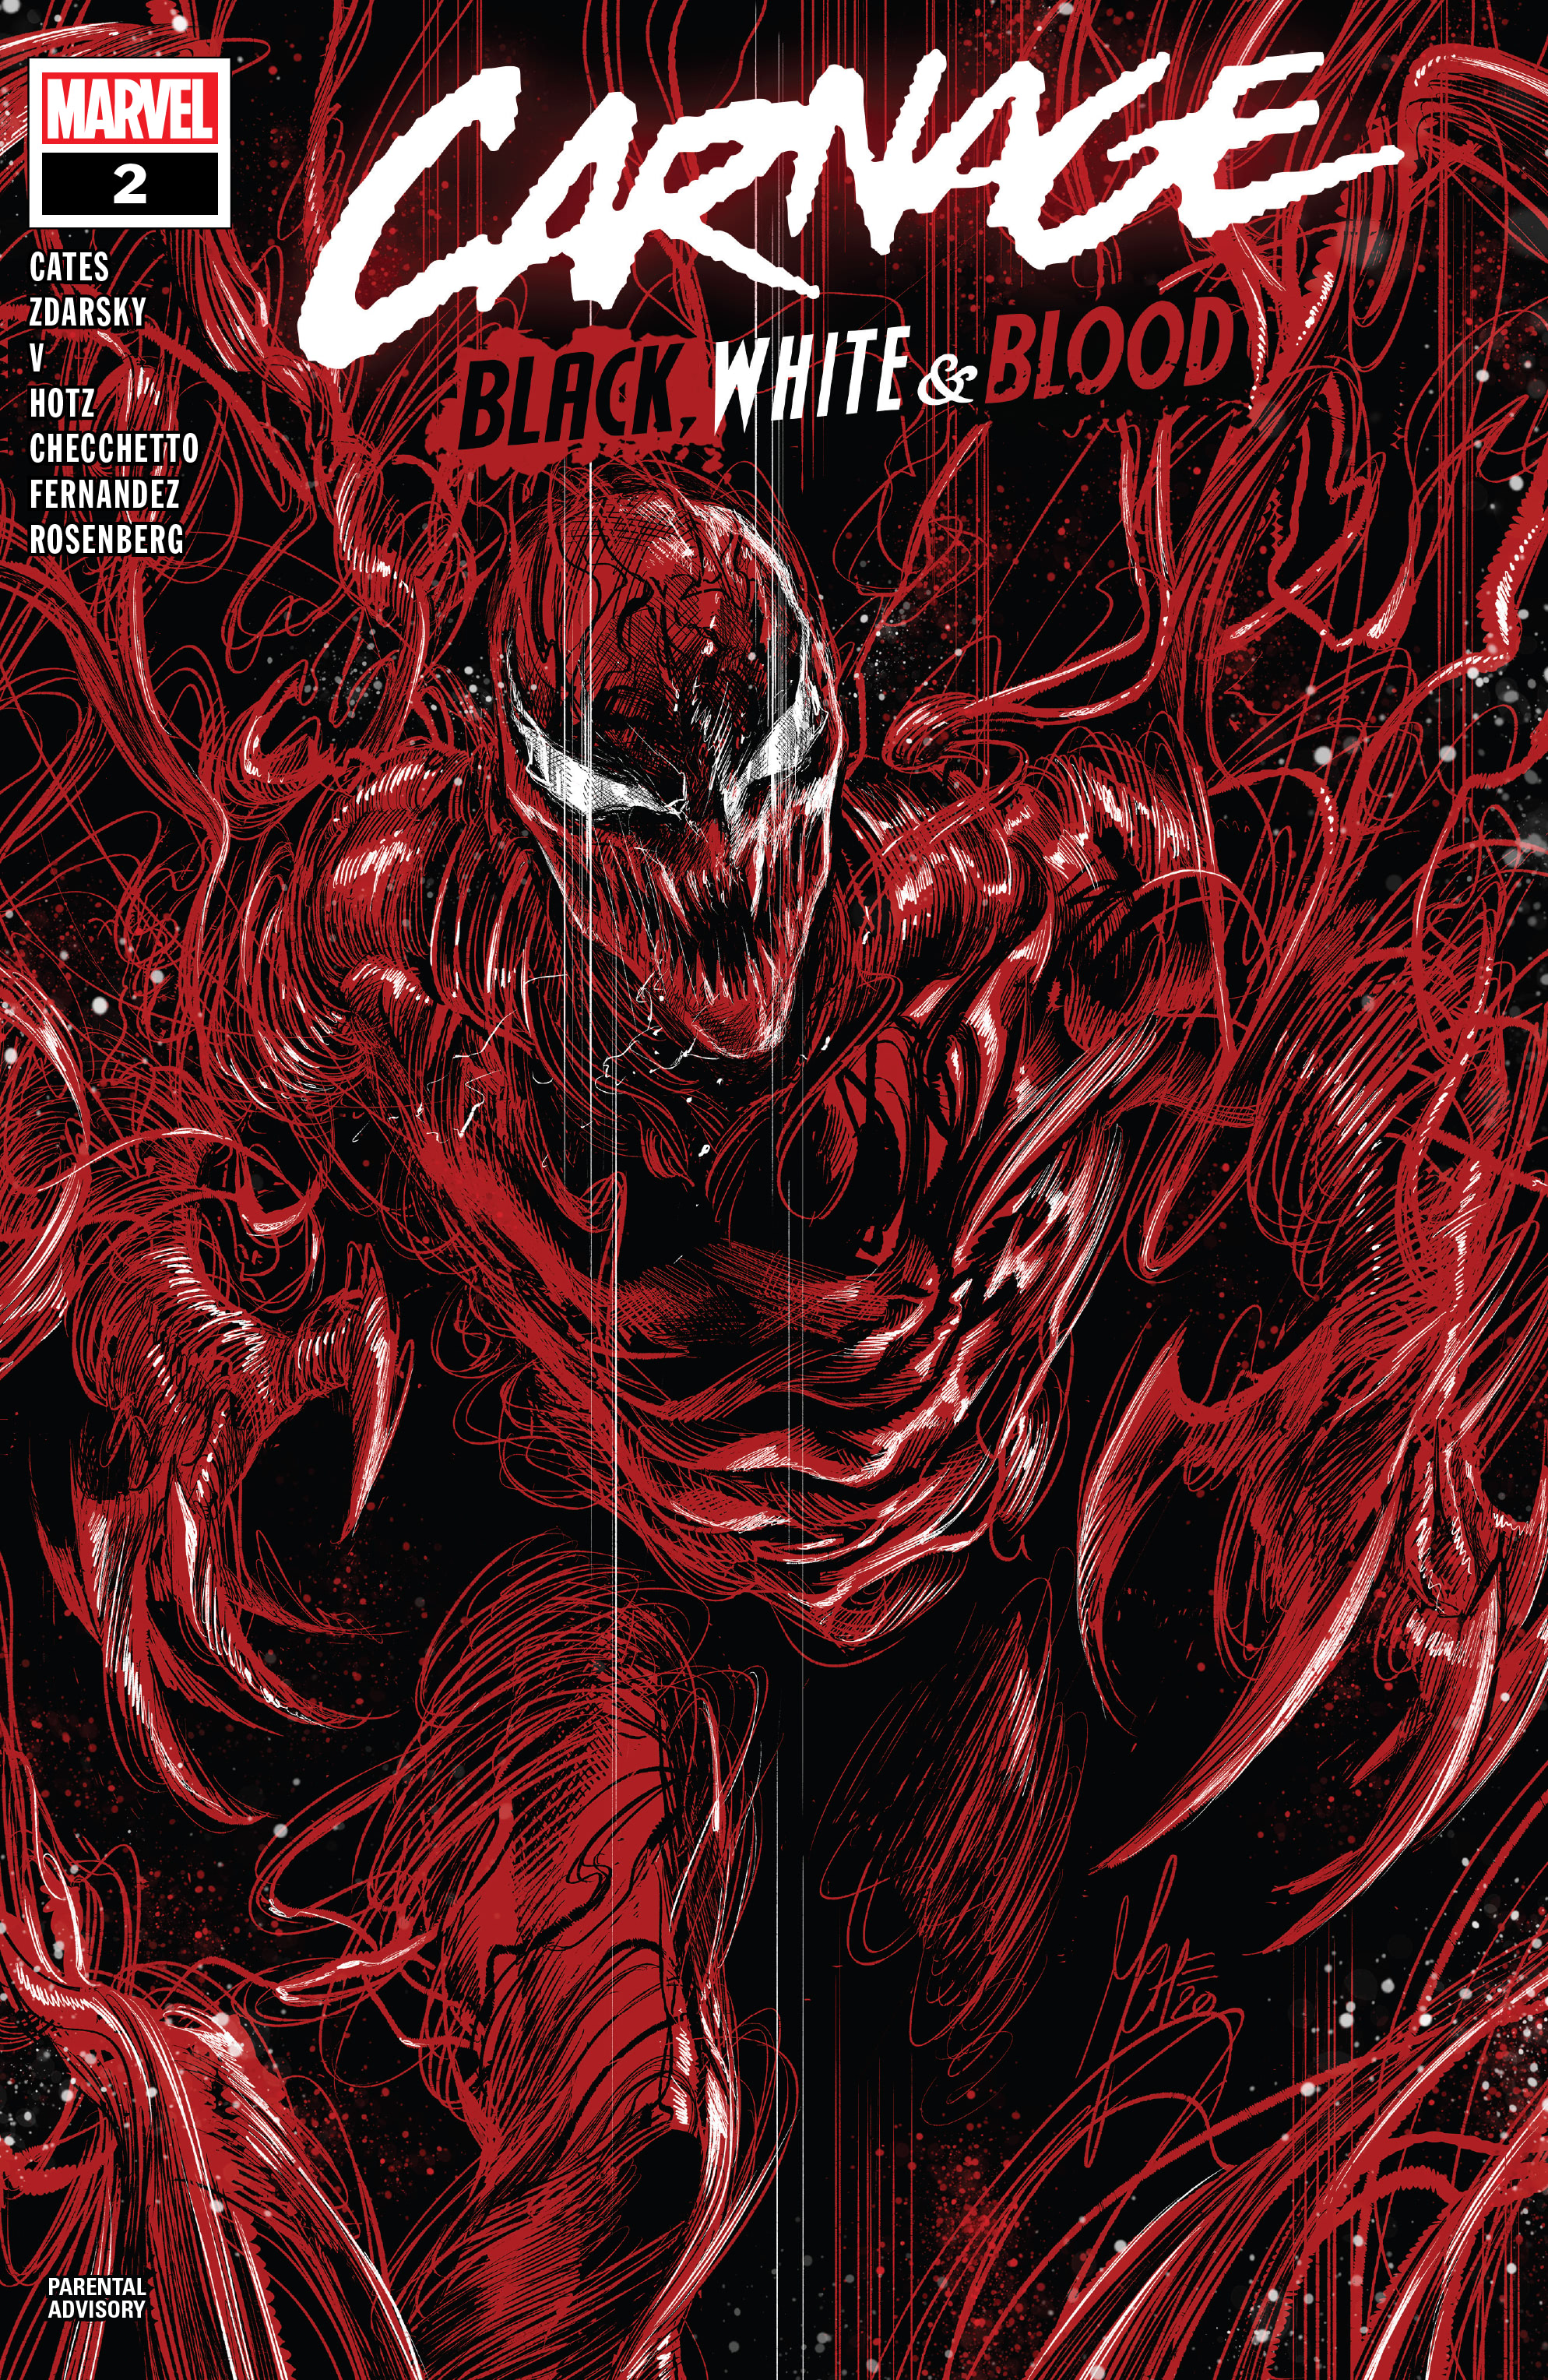 Read online Carnage: Black, White & Blood comic -  Issue #2 - 1